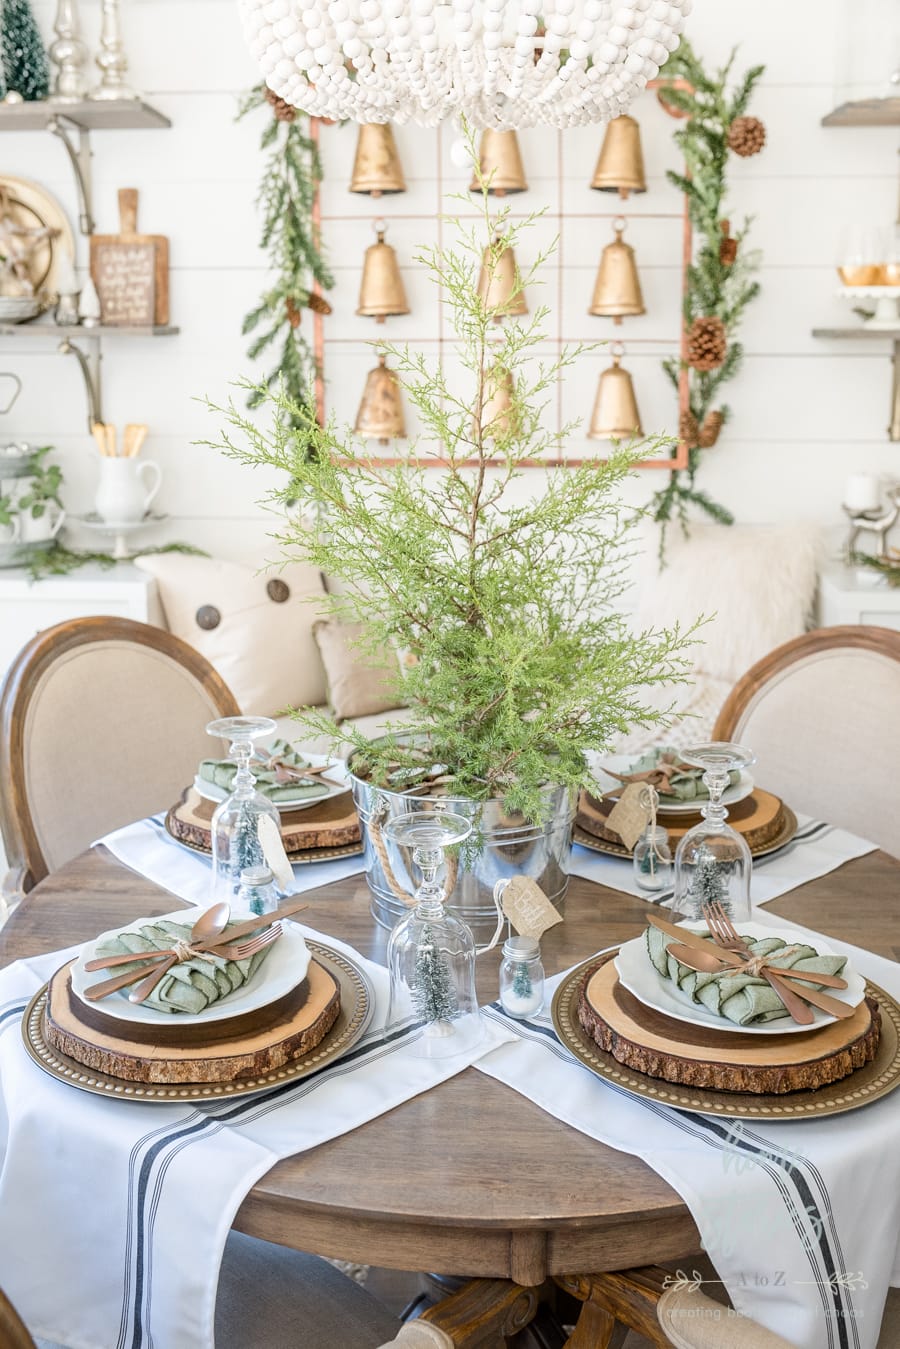 Traditional and elegant centerpiece idea with rustic style